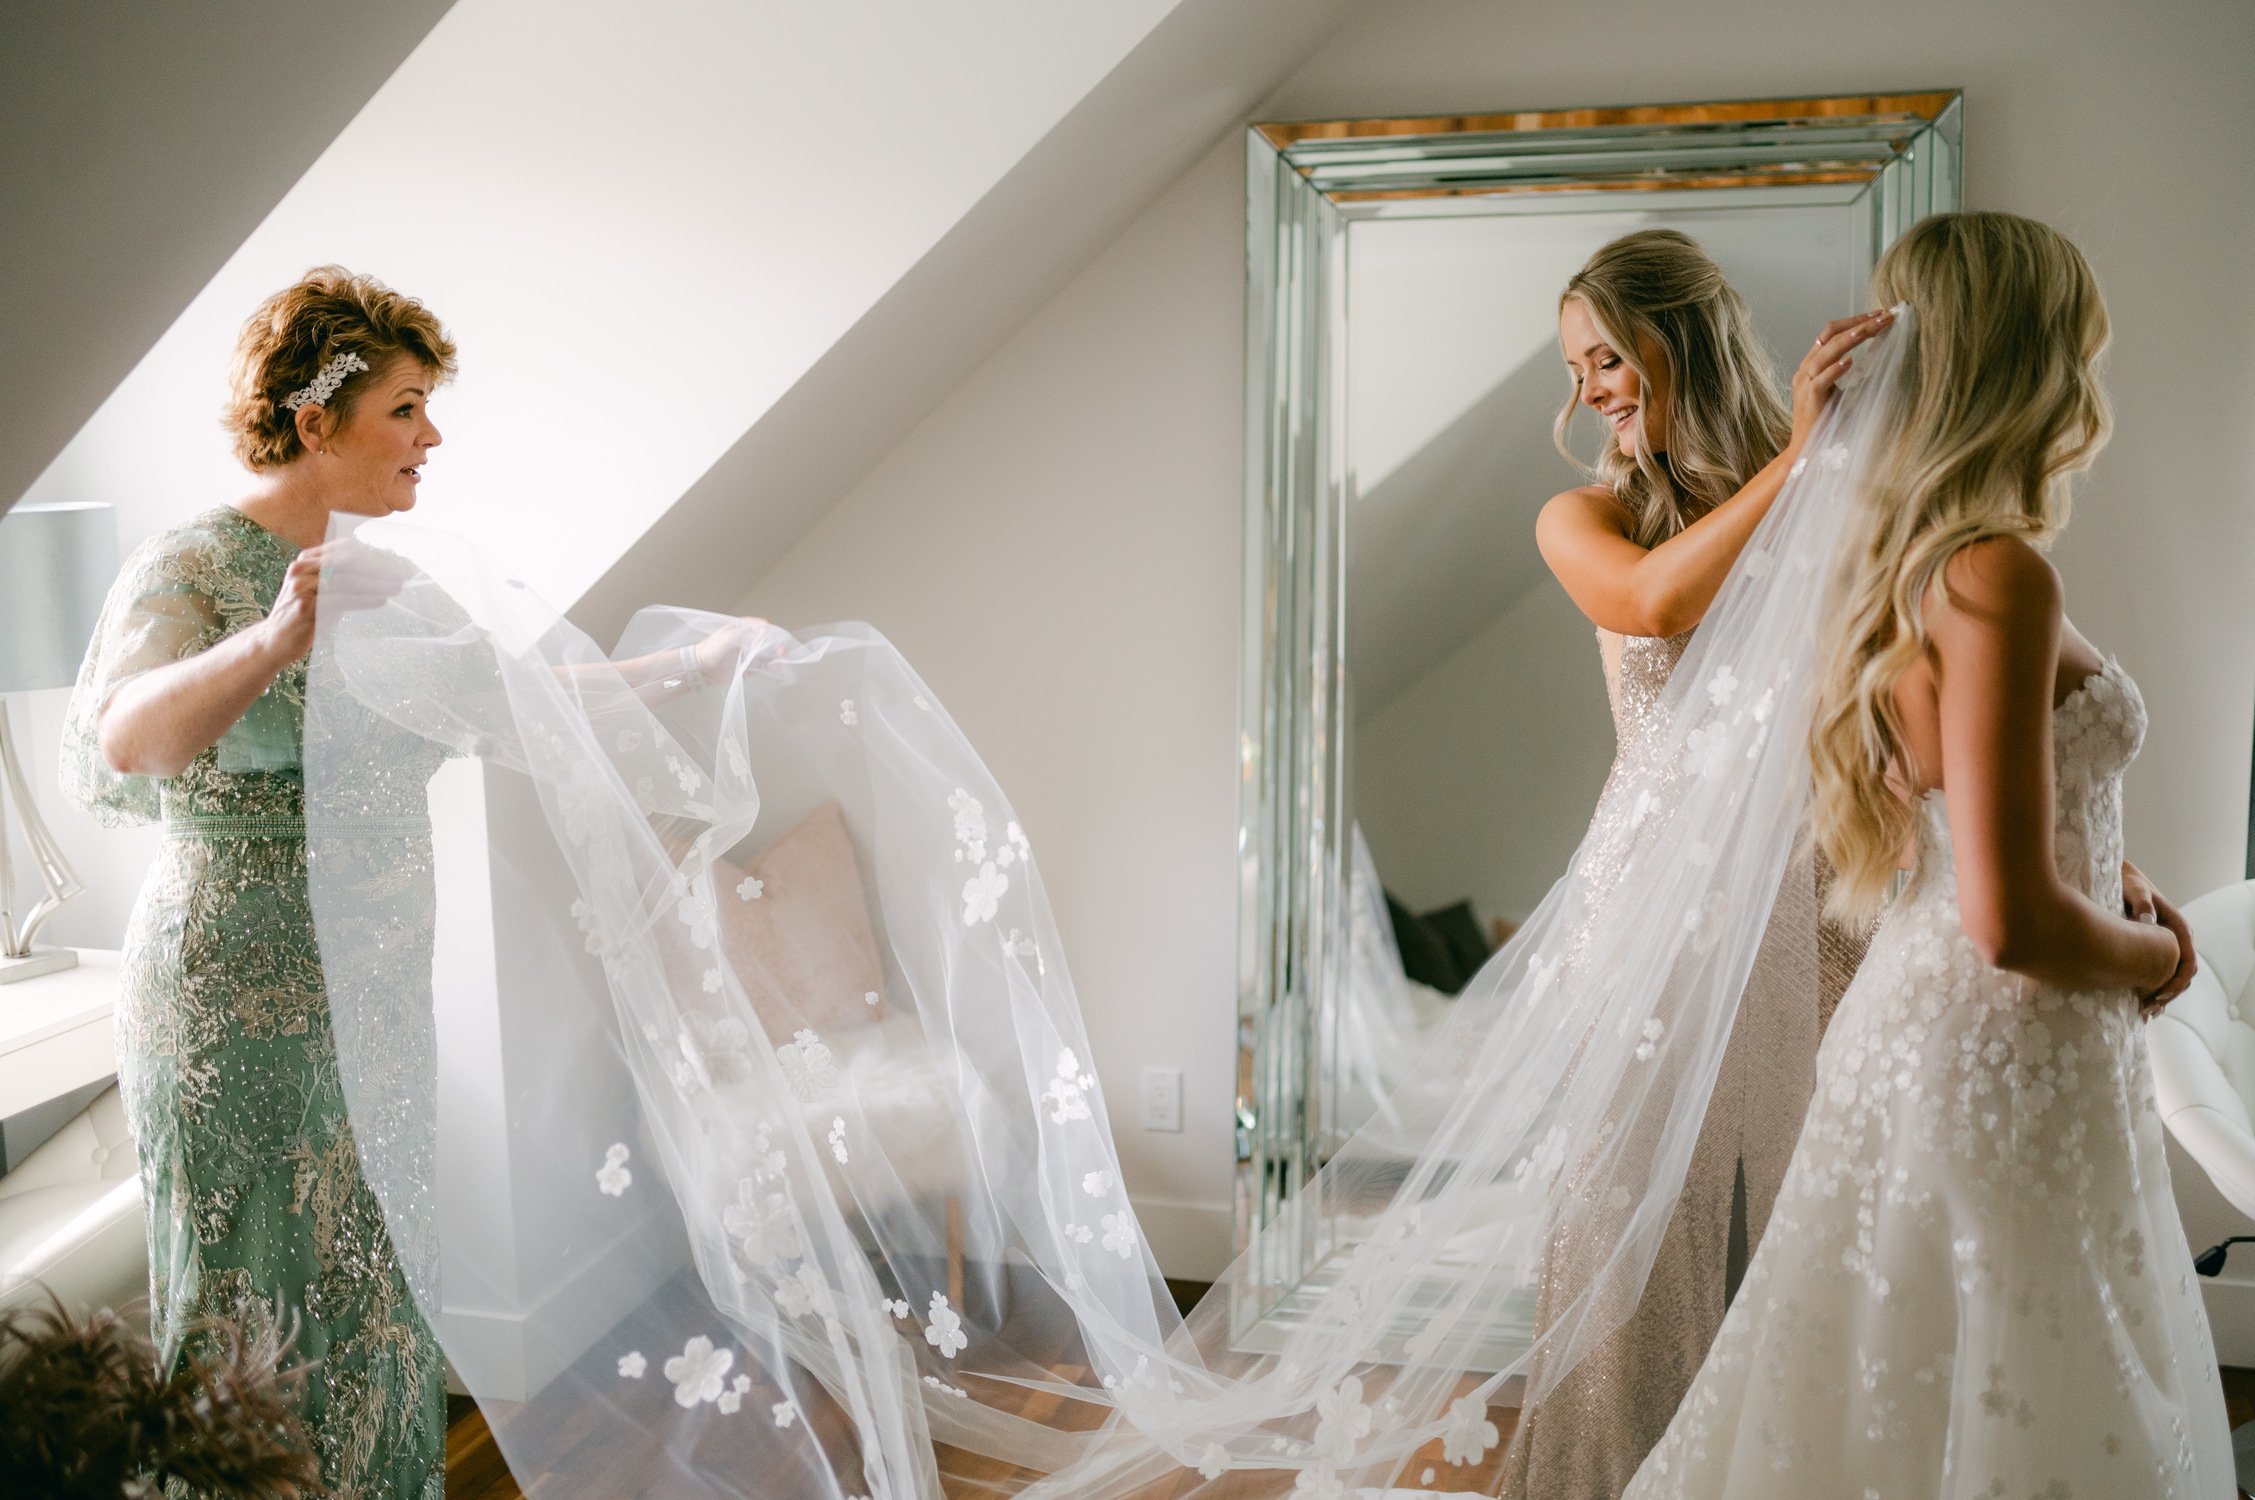 Elm Estate Wedding photos, photo of the maid of honor and the mother of the bride fixing the white flower-detailed veil of the bride